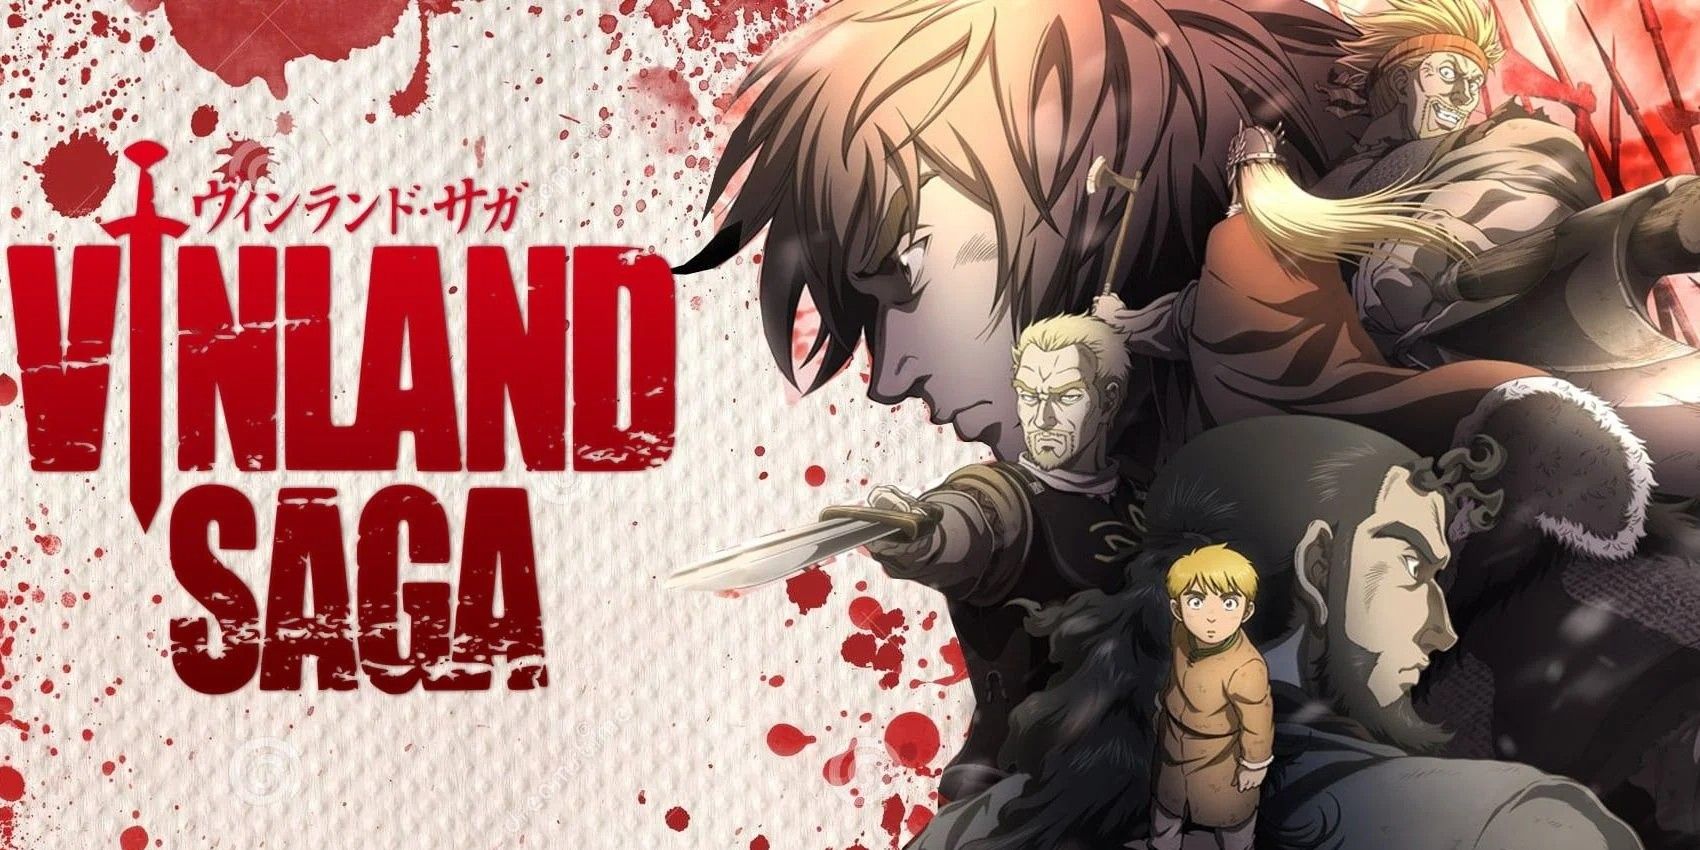 Vinland Saga key art featuring a collage of the main cast.